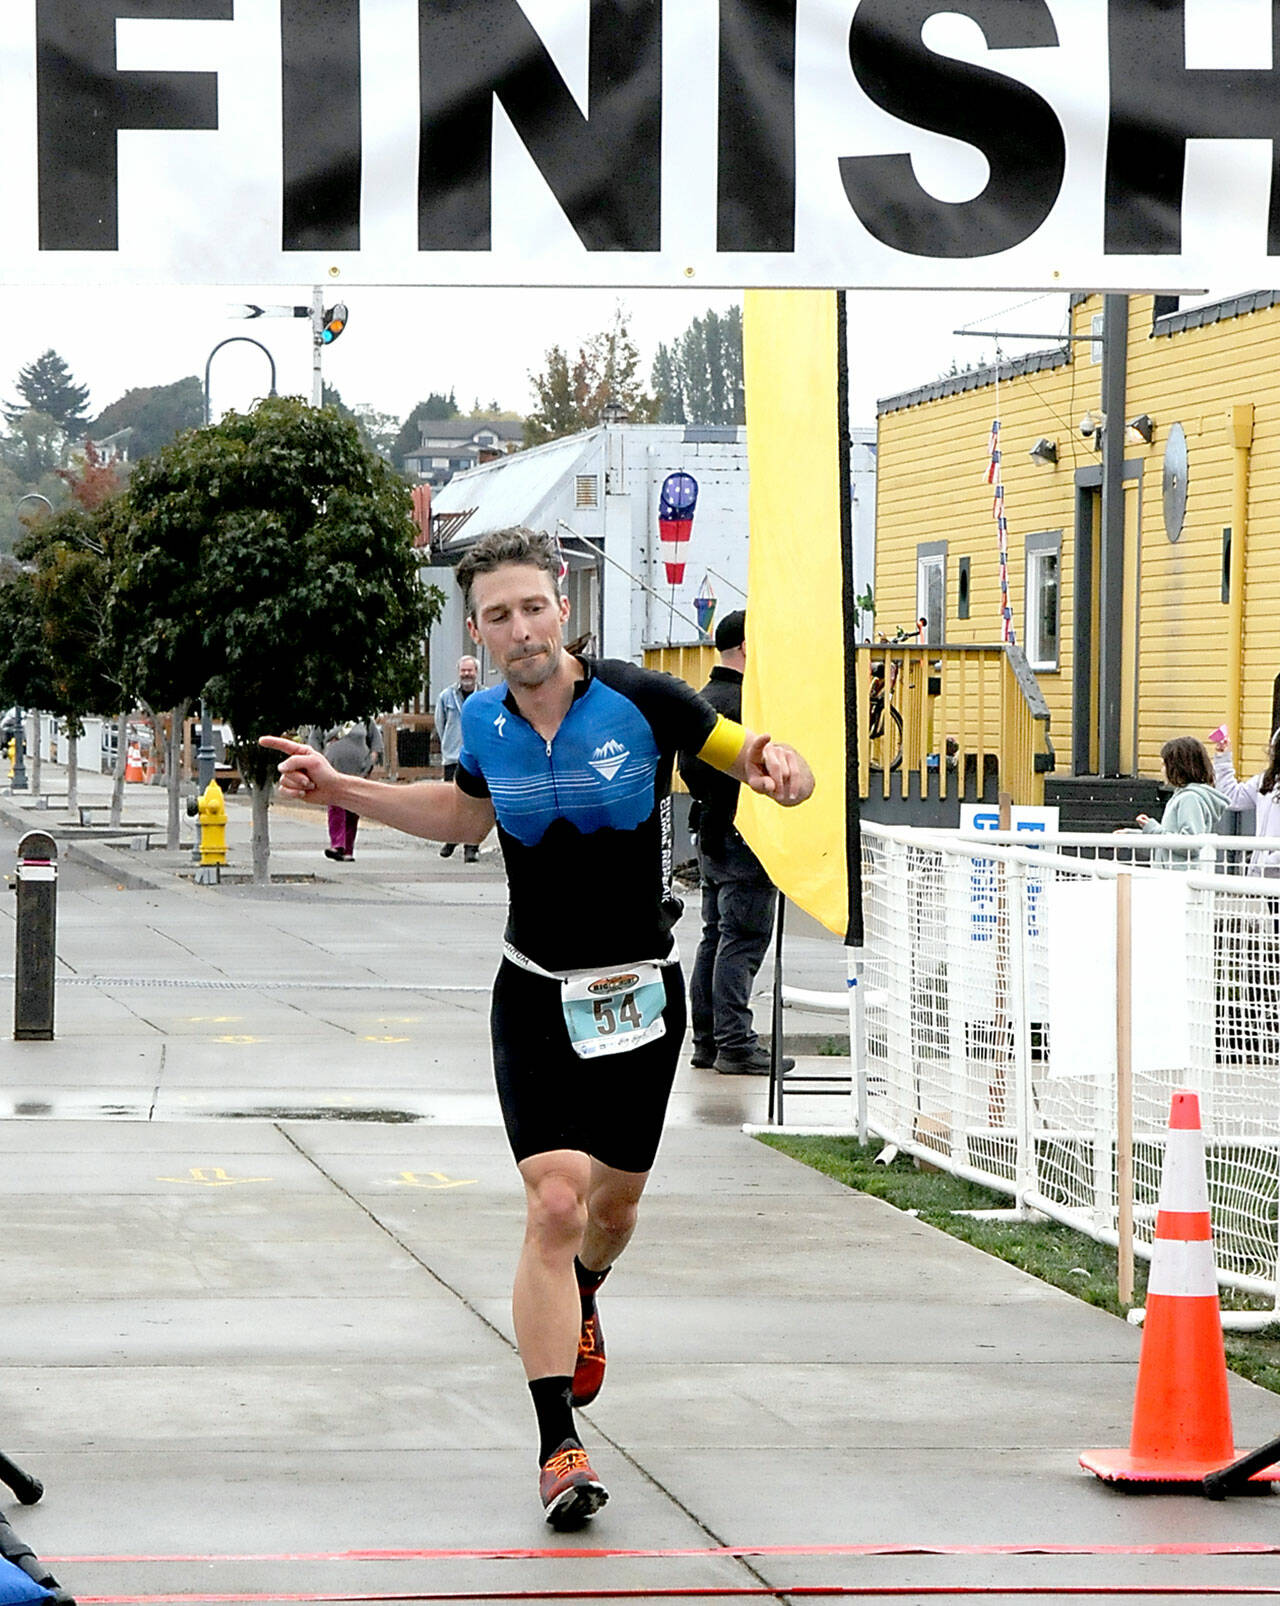 KEITH THORPE/PENINSULA DAILY NEWS Ironman Troy Treaccar of Port Angeles finishes first in Saturday’s Big Hurt.